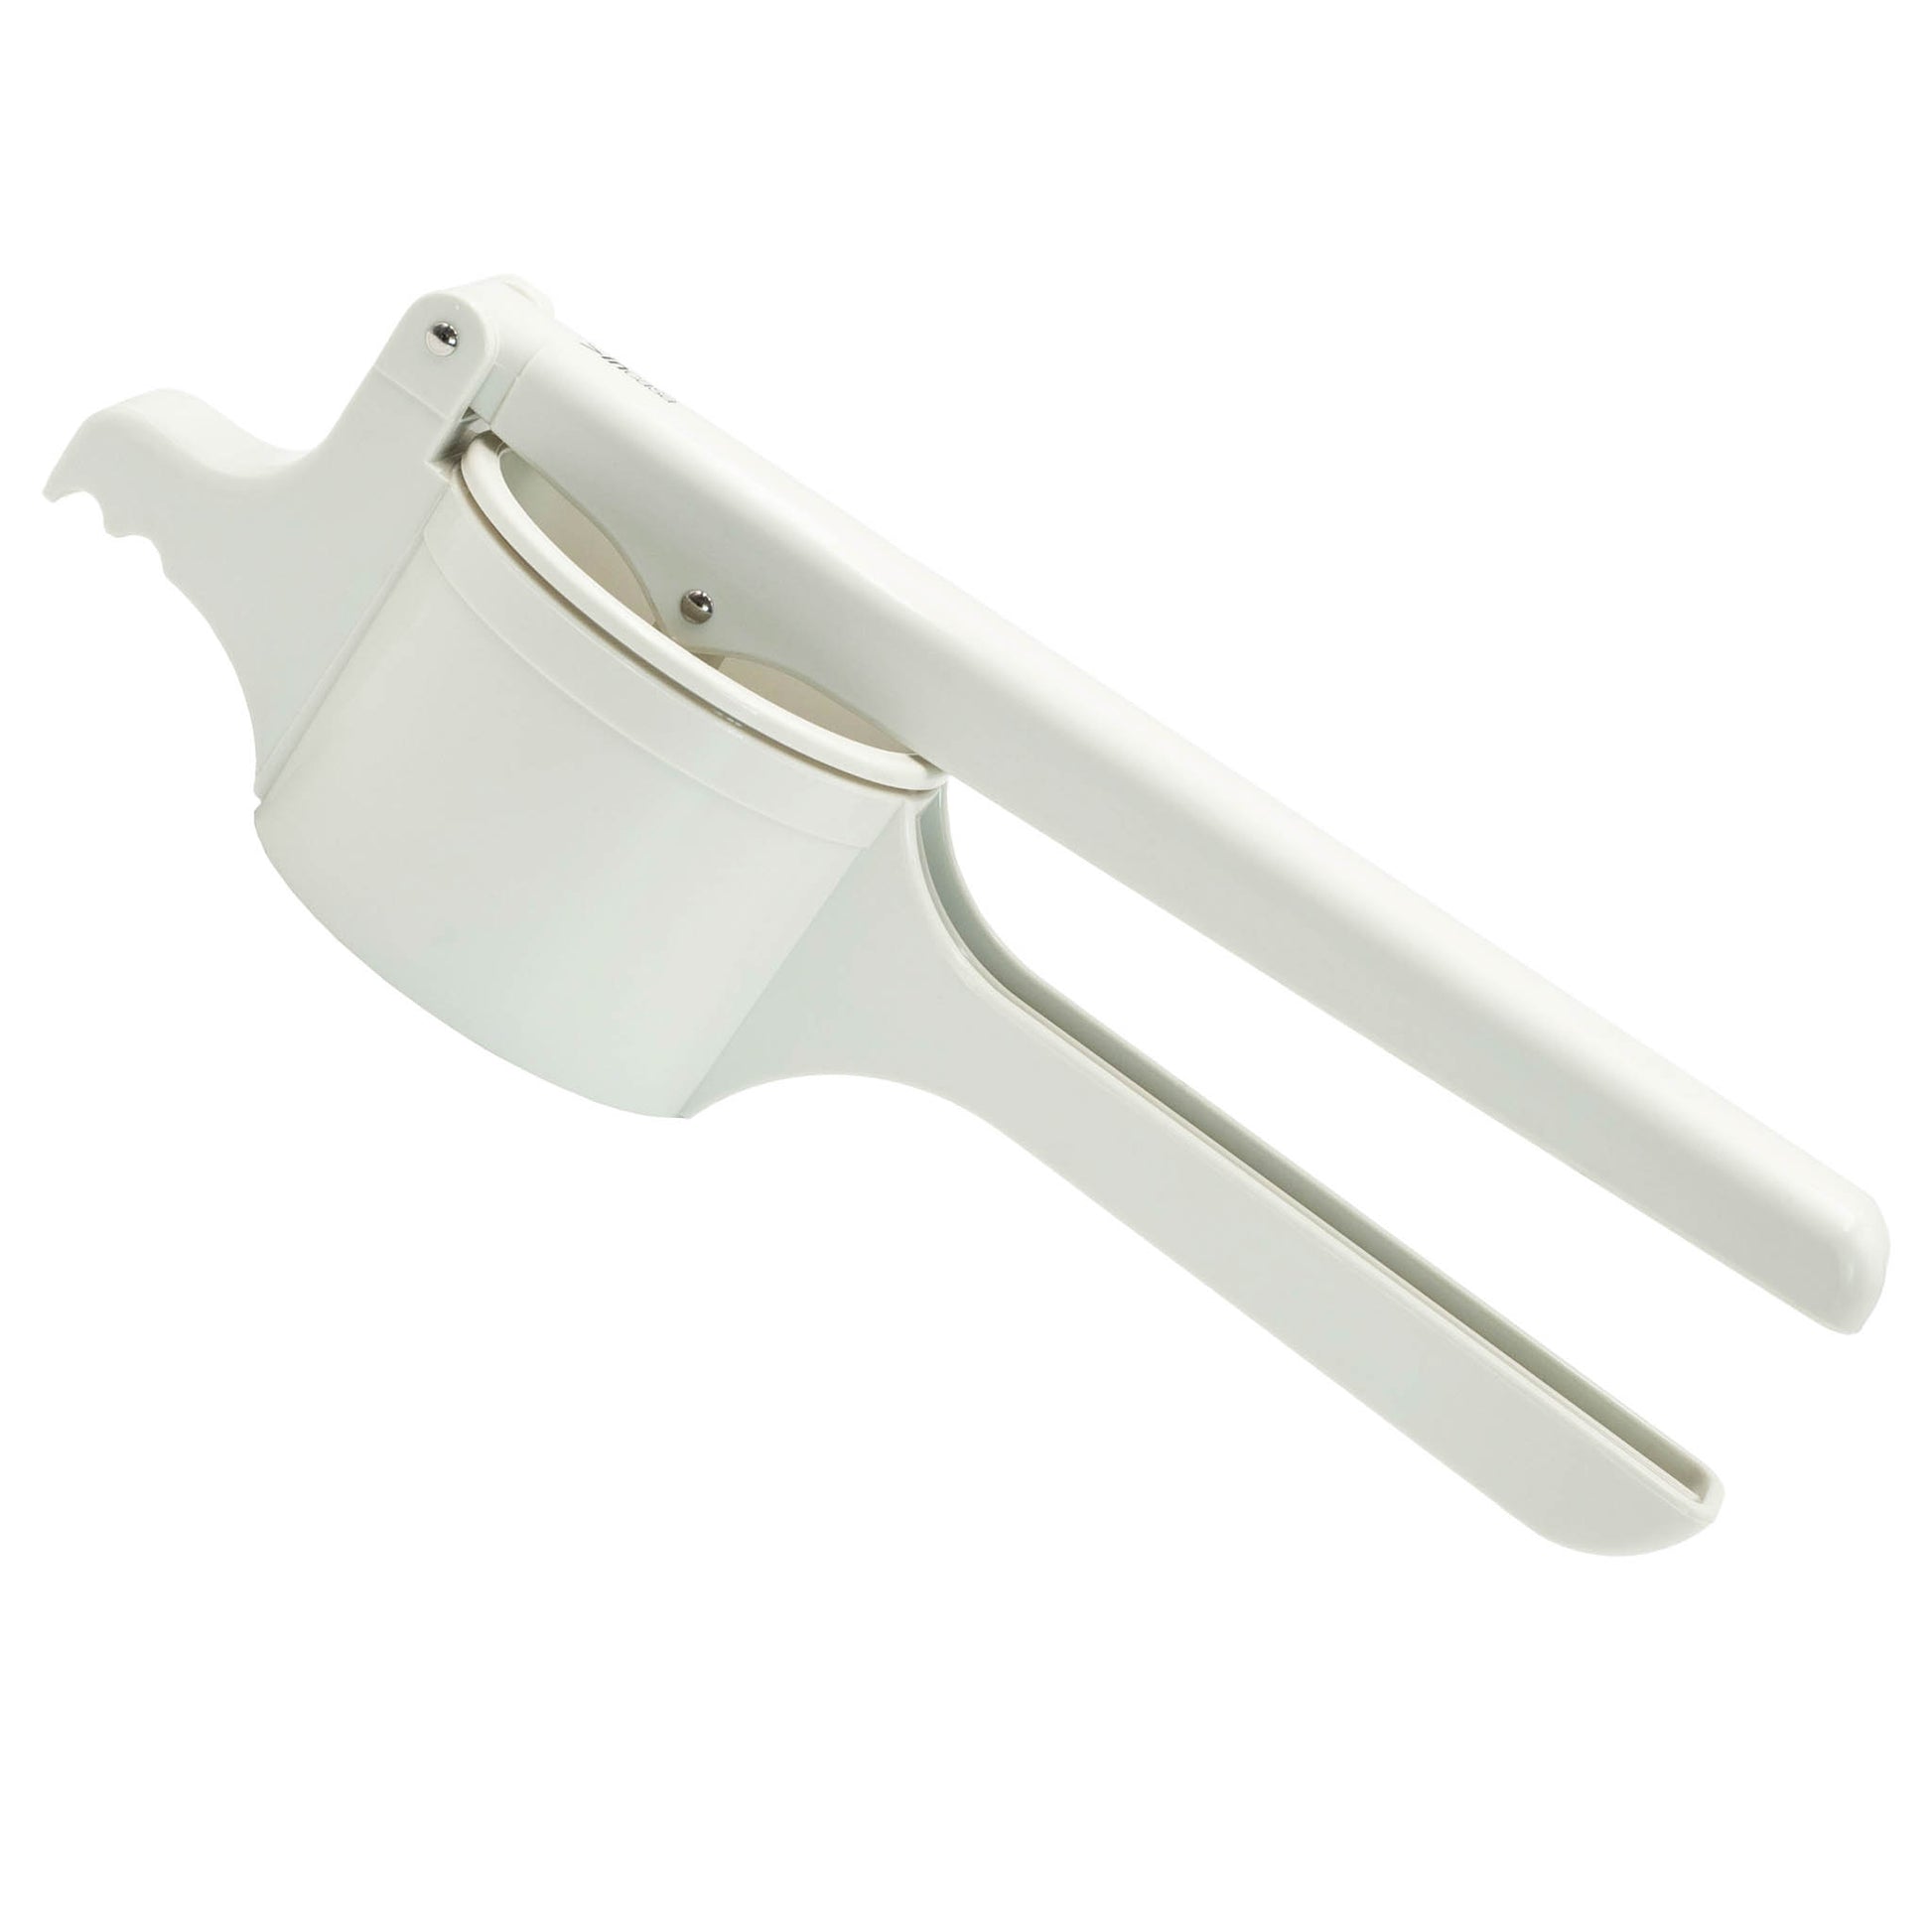 Potato ricer / masher. Works with cooked vegetables you want to mash. 